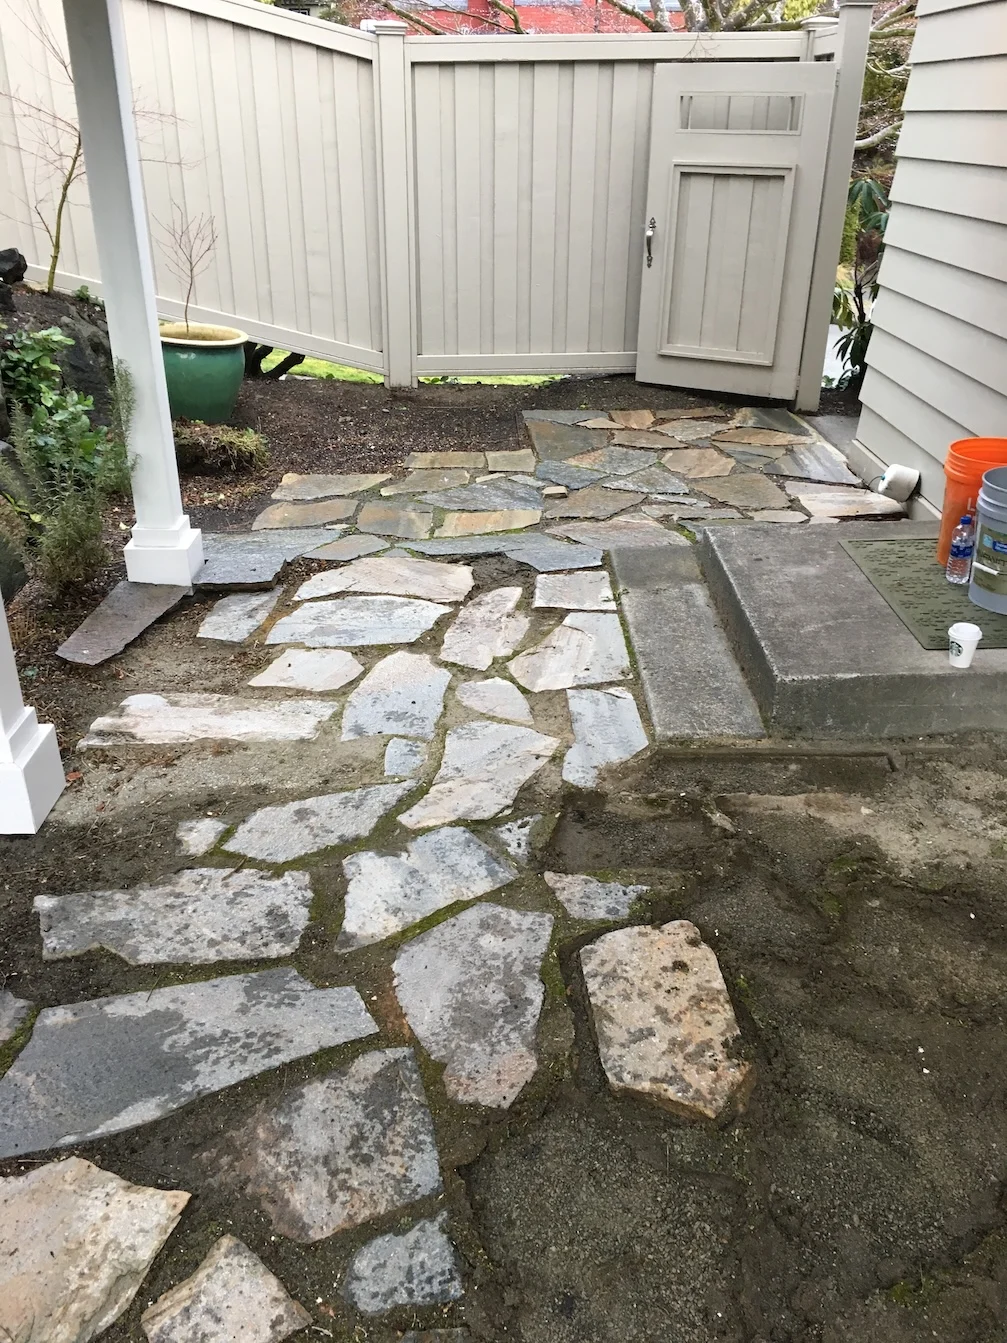 Patio before we started our rebuild
